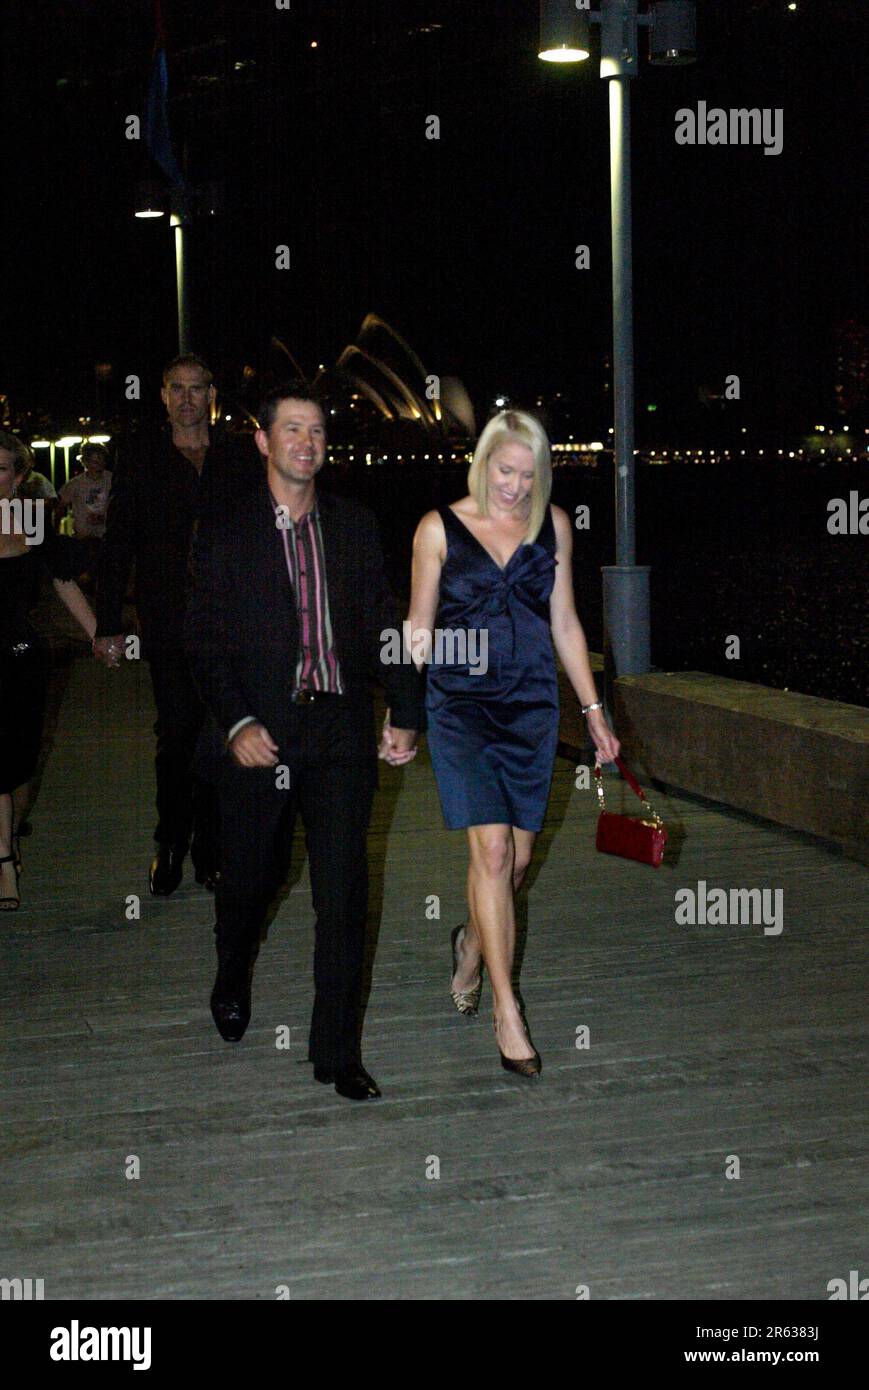 Ricky Ponting The engagement party for cricketer Michael Clarke and his fiancé Lara Bingle held at Luna Park. Sydney, Australia. 04.04.08. Stock Photo